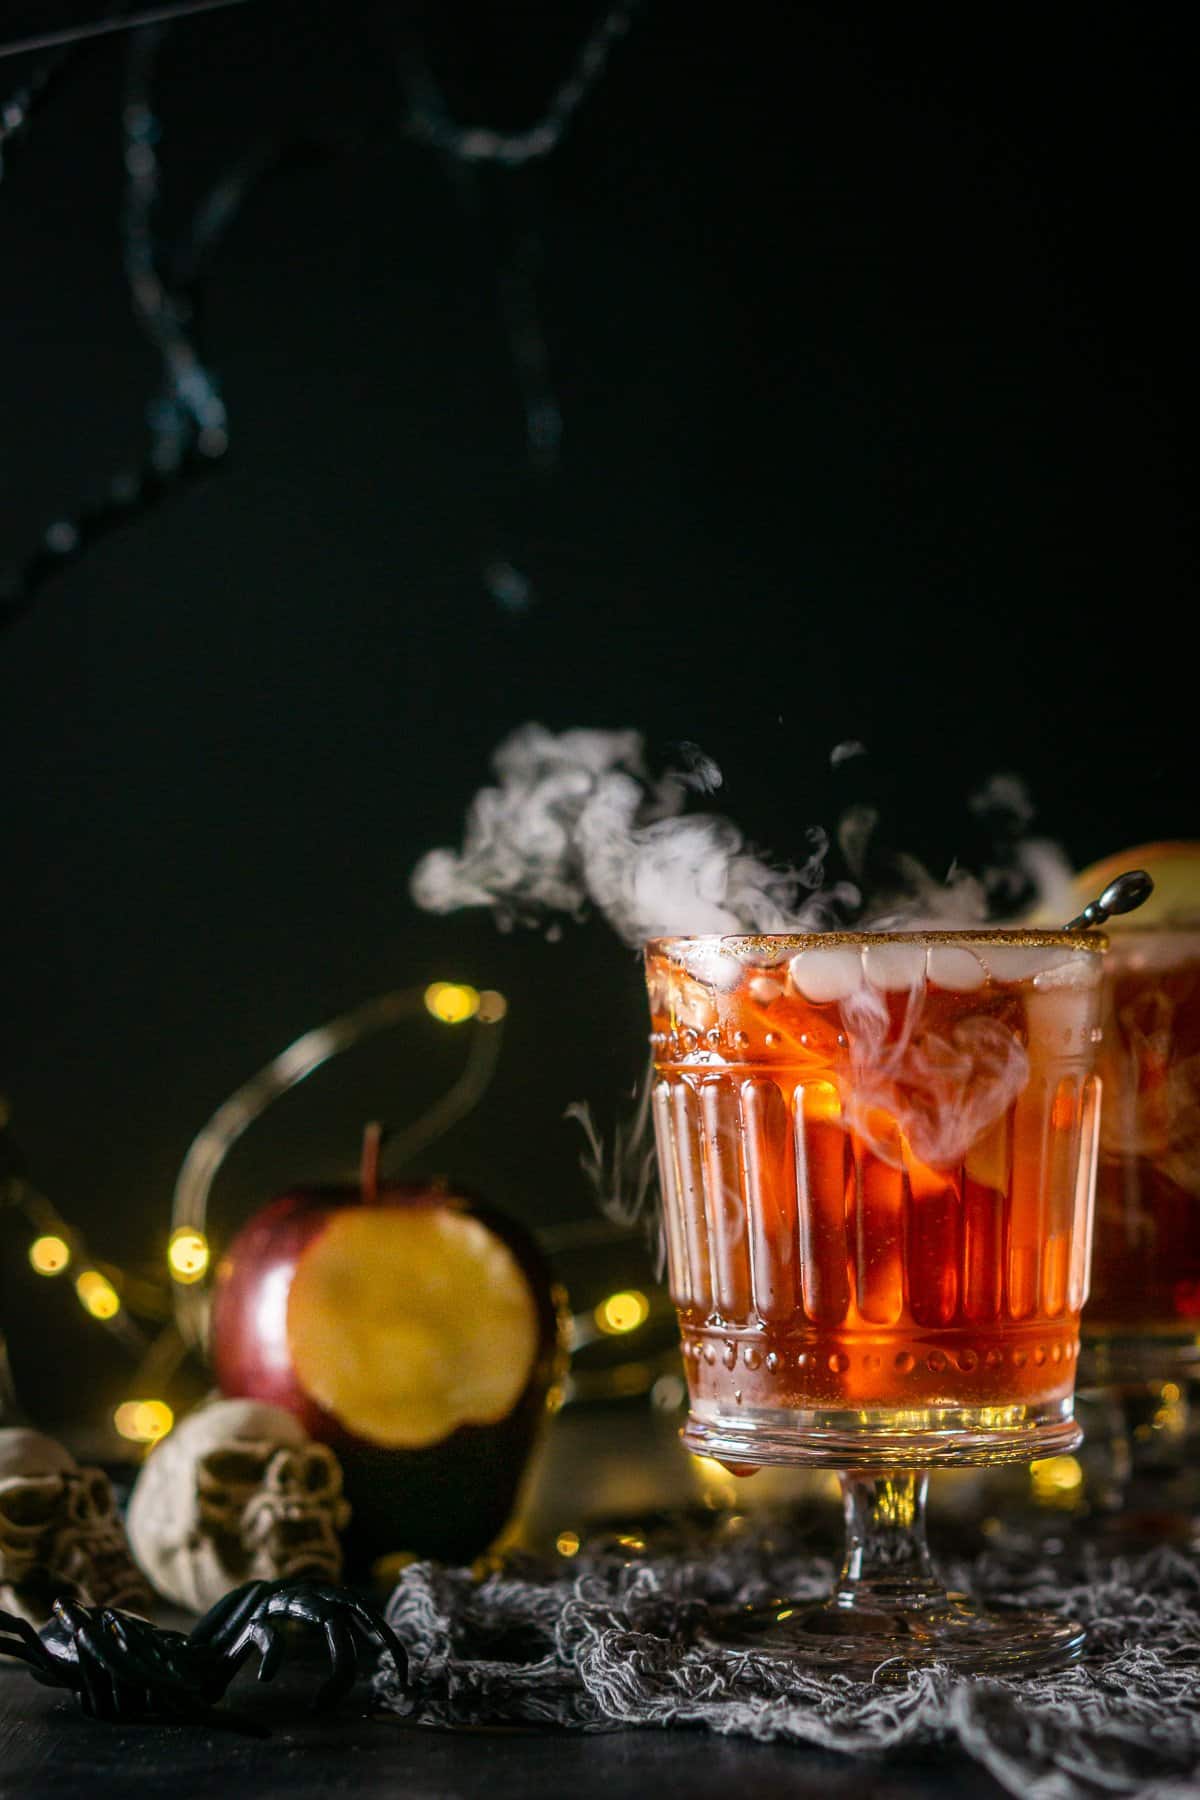 Bubbling, smoky cocktail in a glass with apples, skull and spider props in the background.